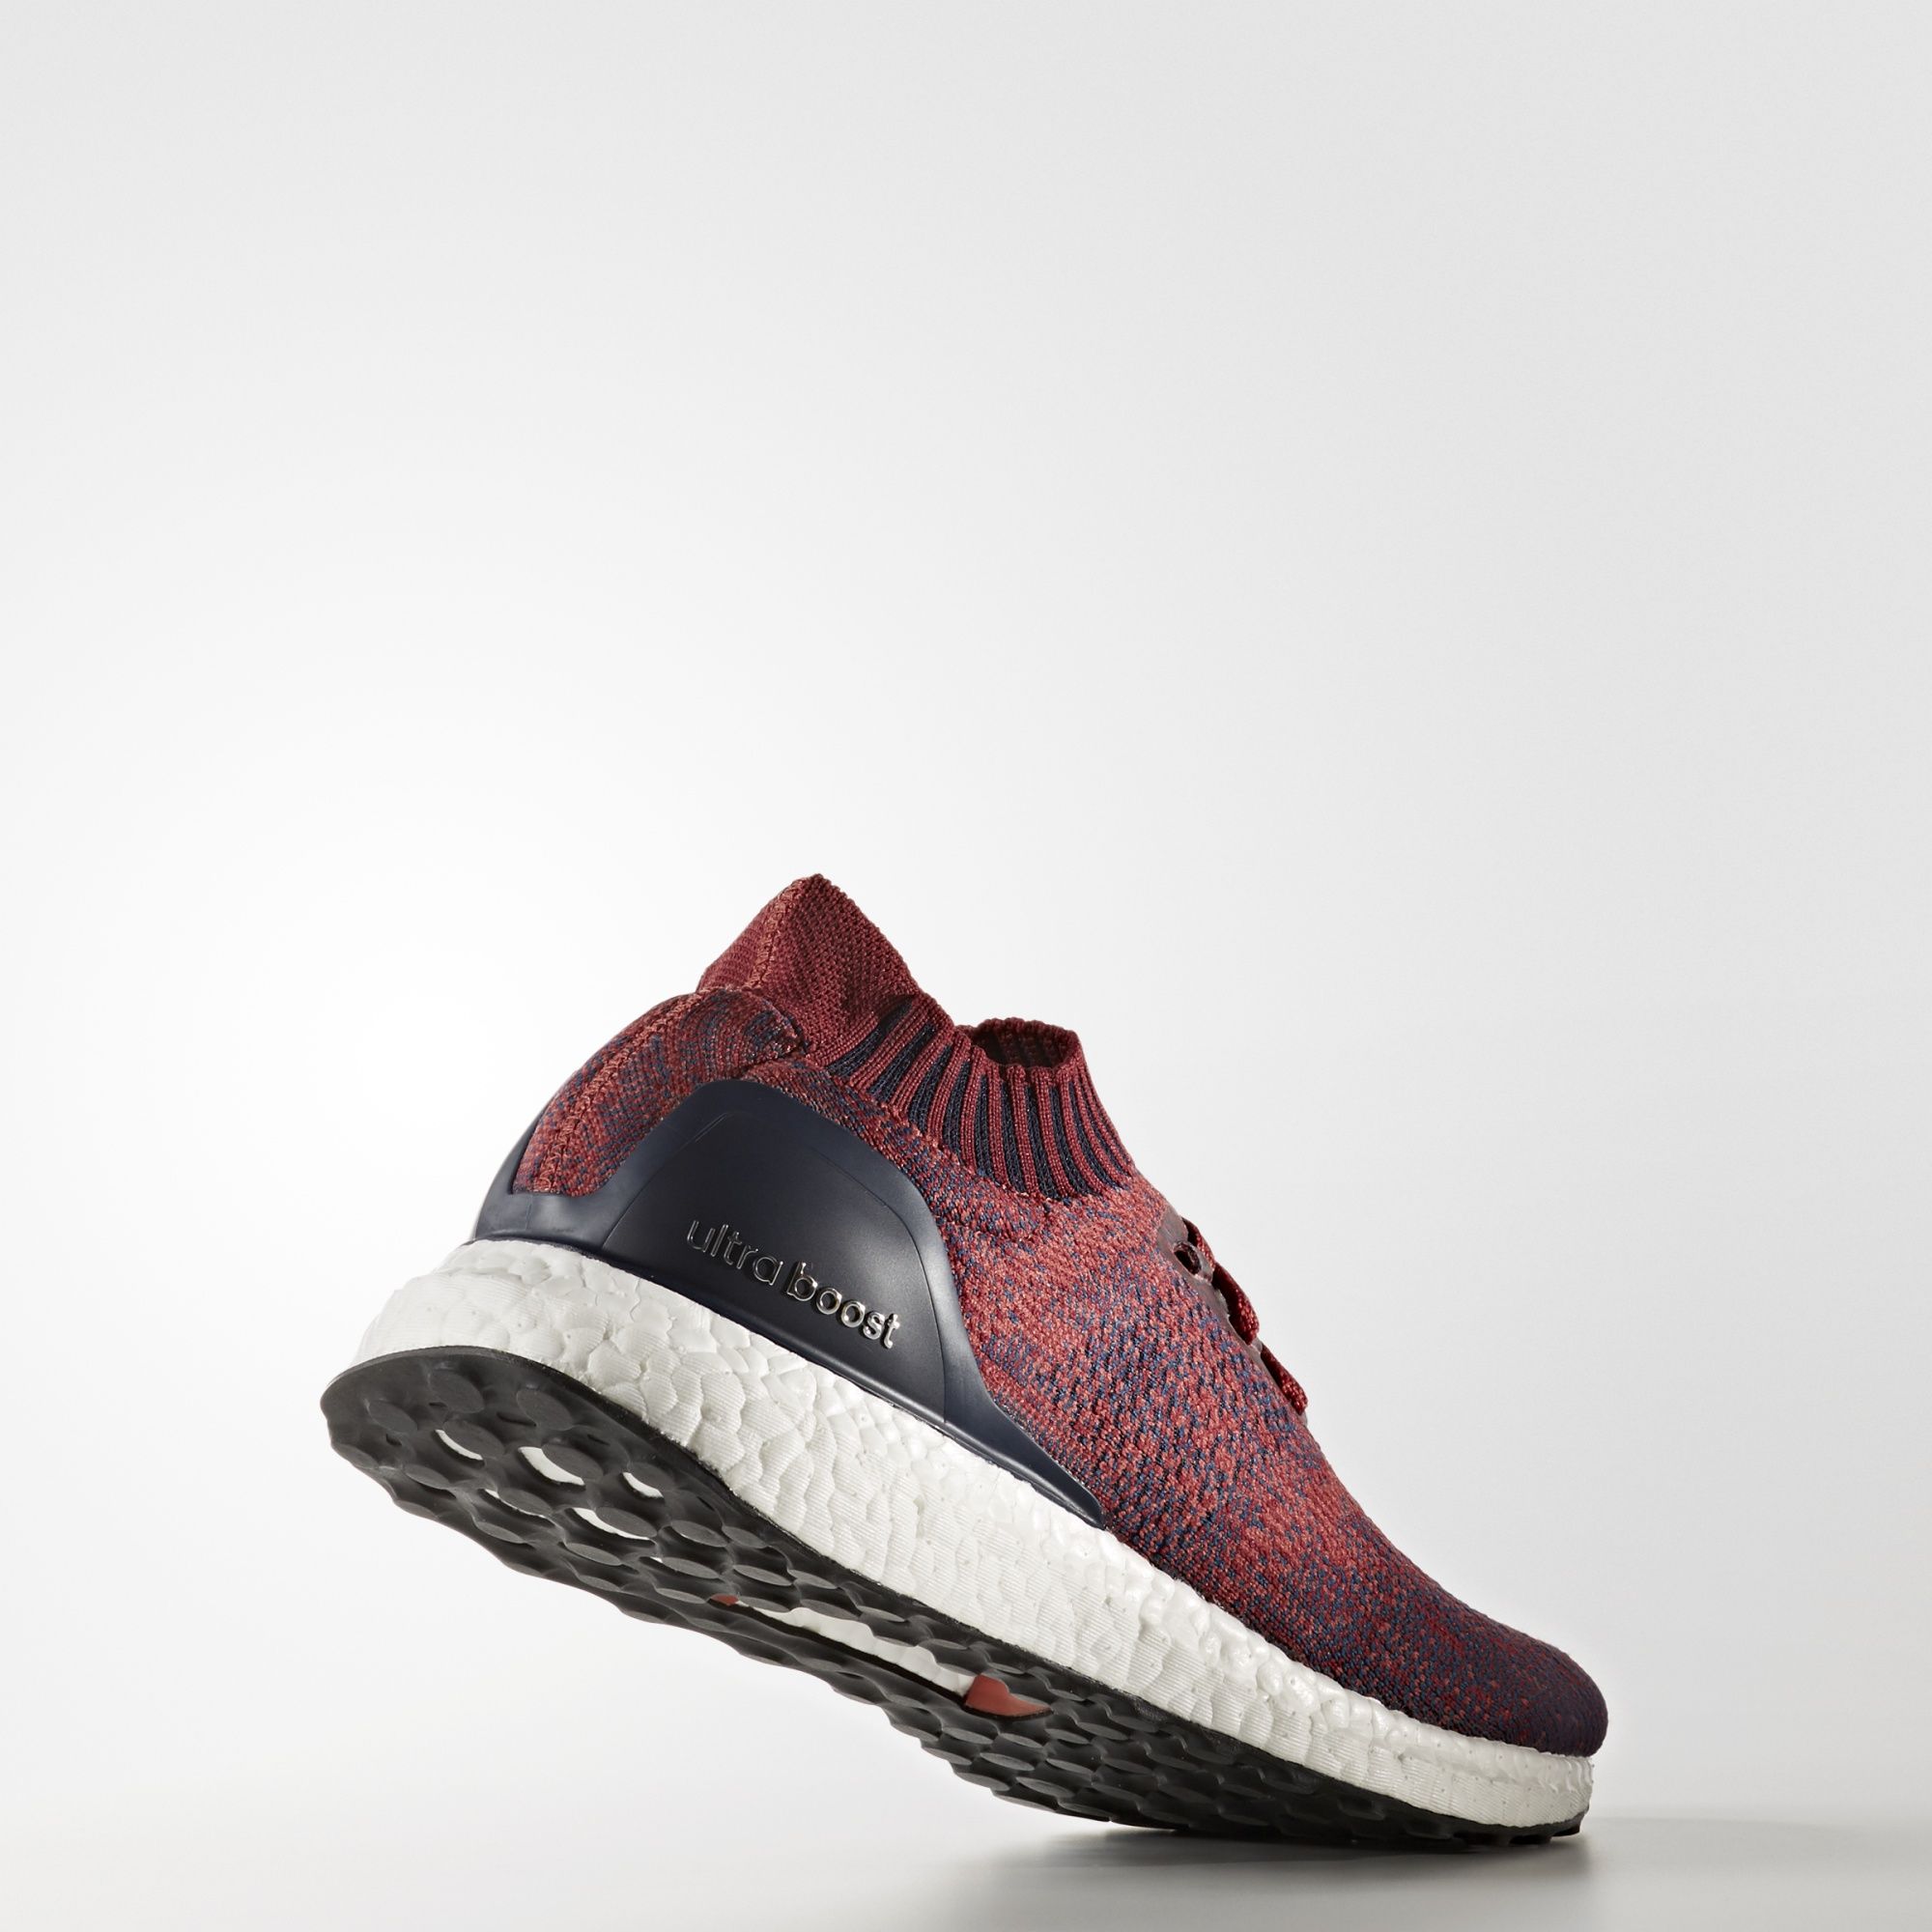 Adidas Ultra Boost Uncaged
Mystery Red / Burgundy